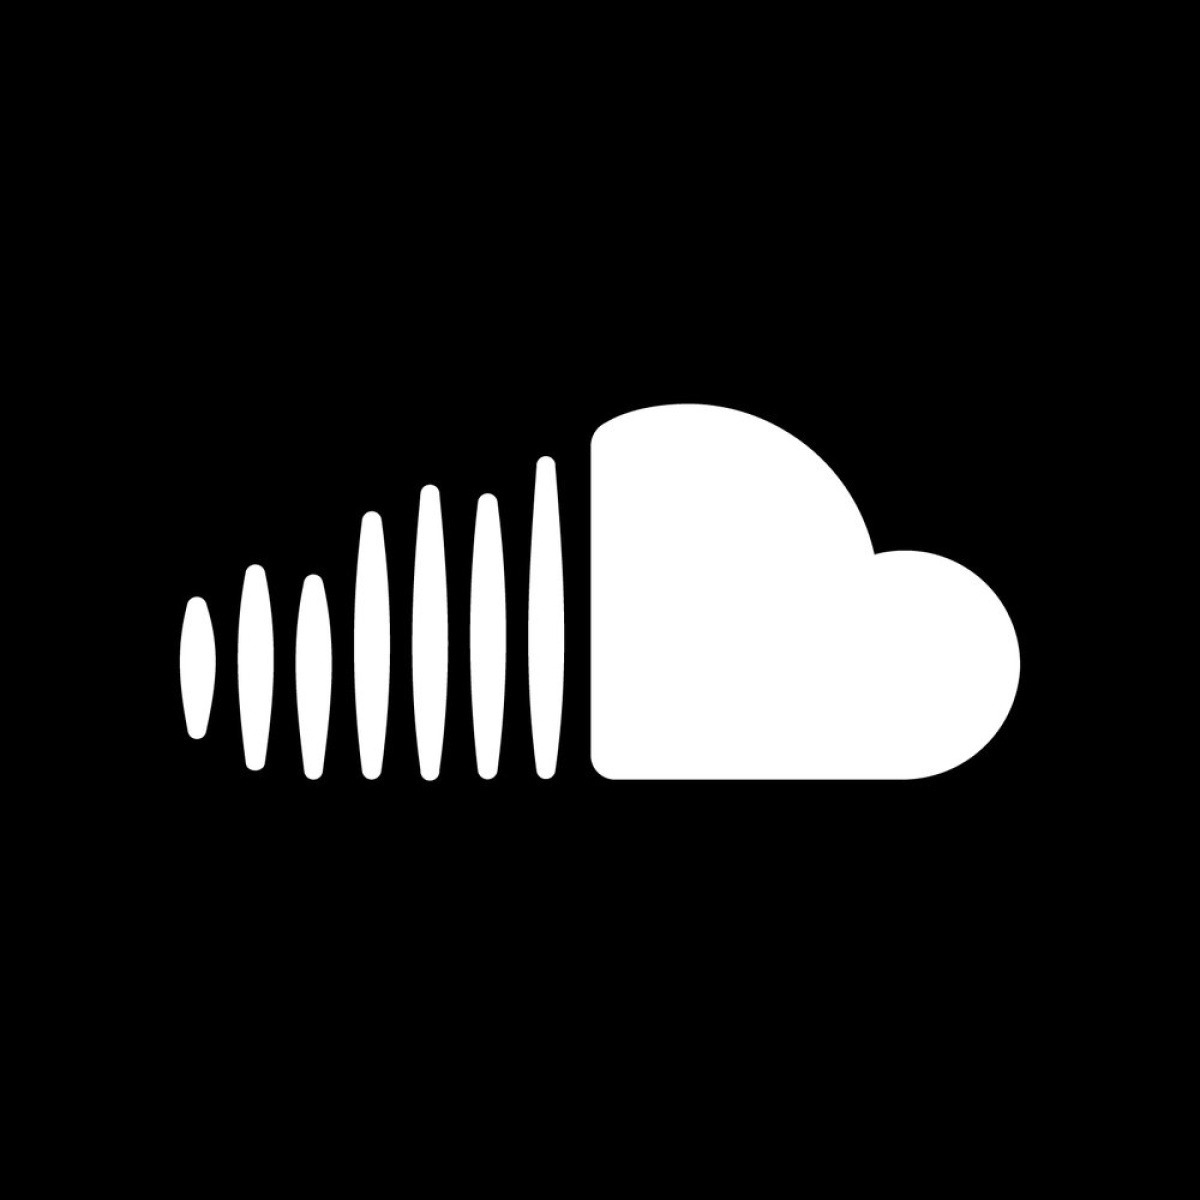 Warner Music Group adopts fan-powered royalties system for Soundcloud streams